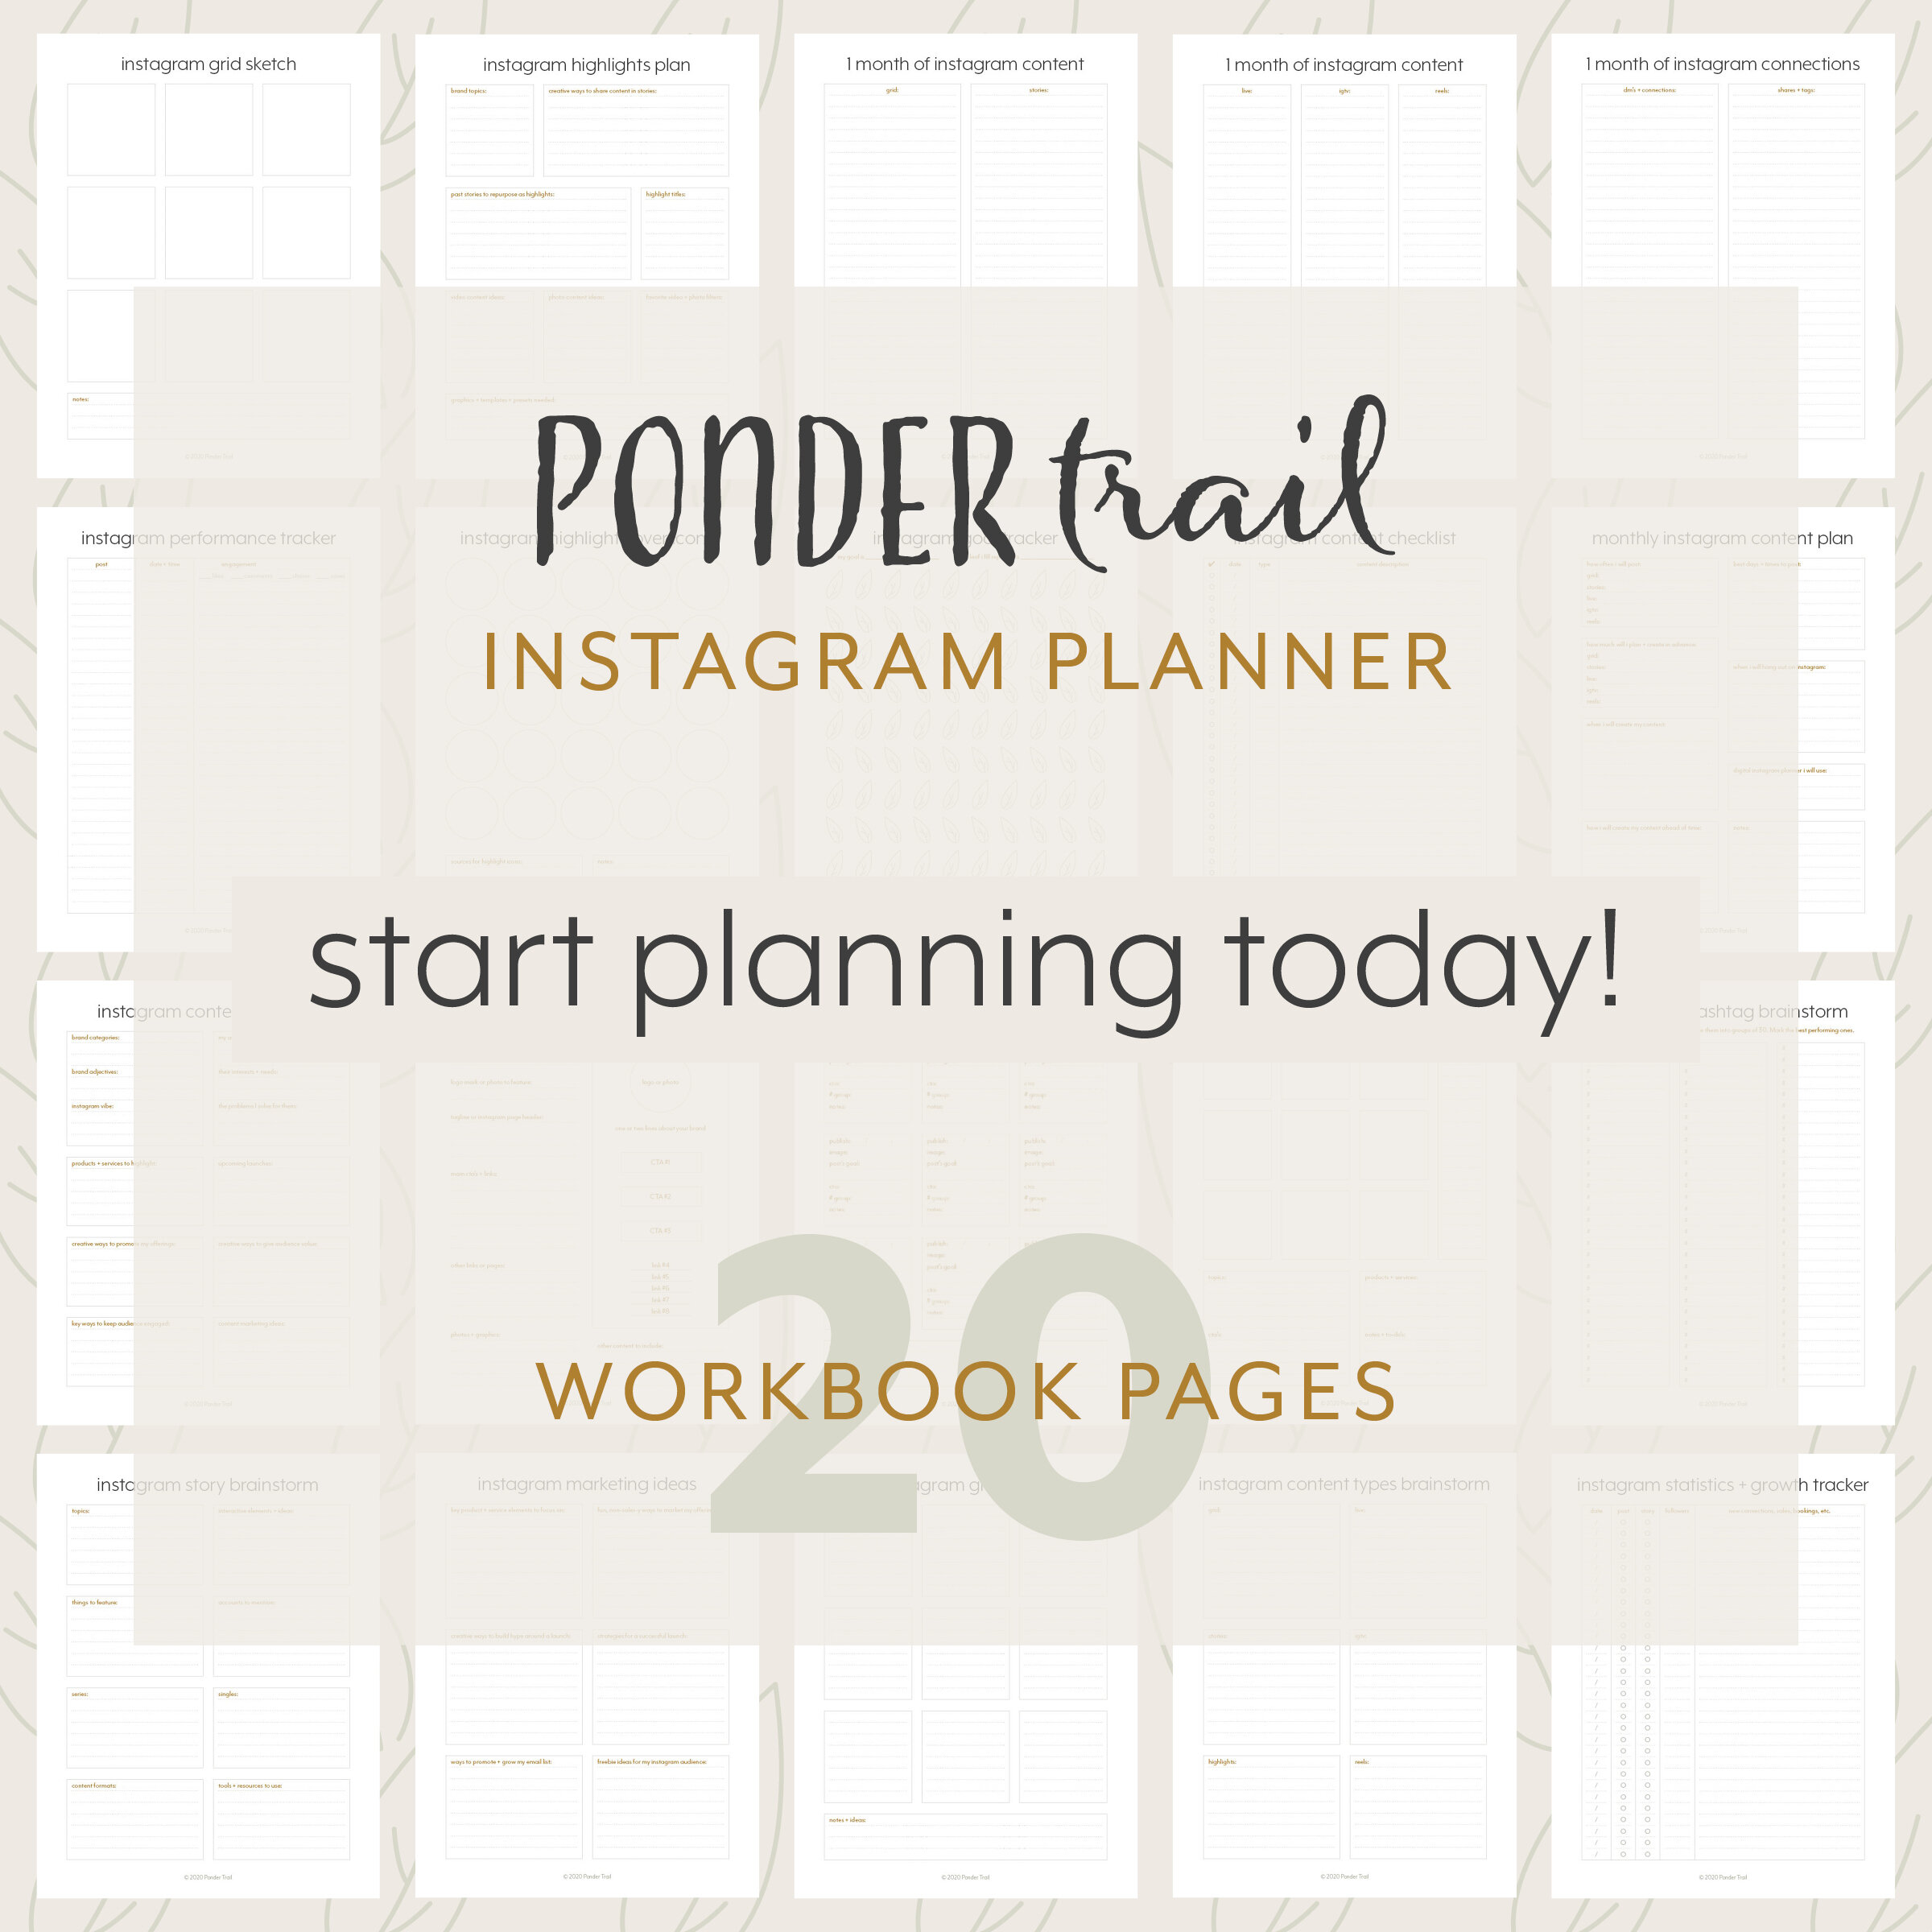 20 Workbook Pages Plan Instagram Marketing Strategy and Content Planner.jpg